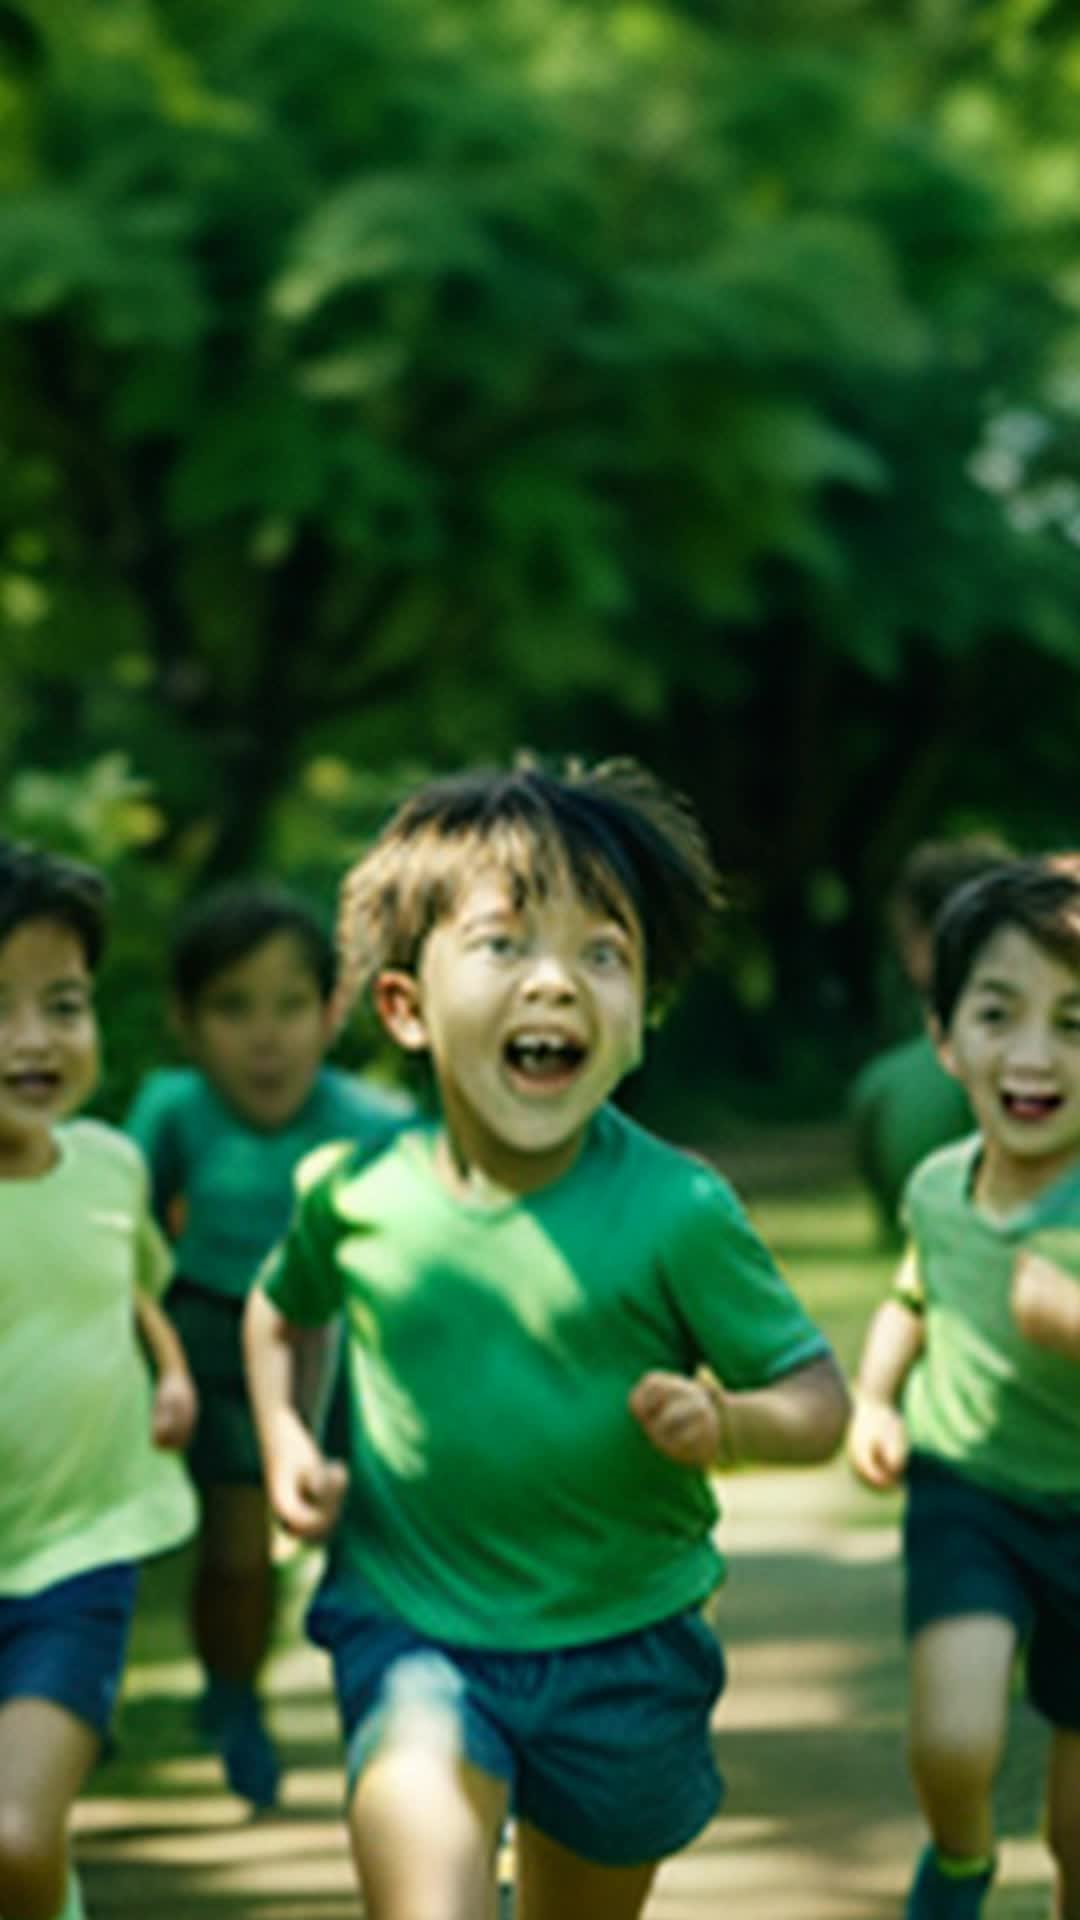 Group of young children dash through verdant park, vibrant leaves fluttering in soft breeze, eyes scanning, high-energy, playful atmosphere